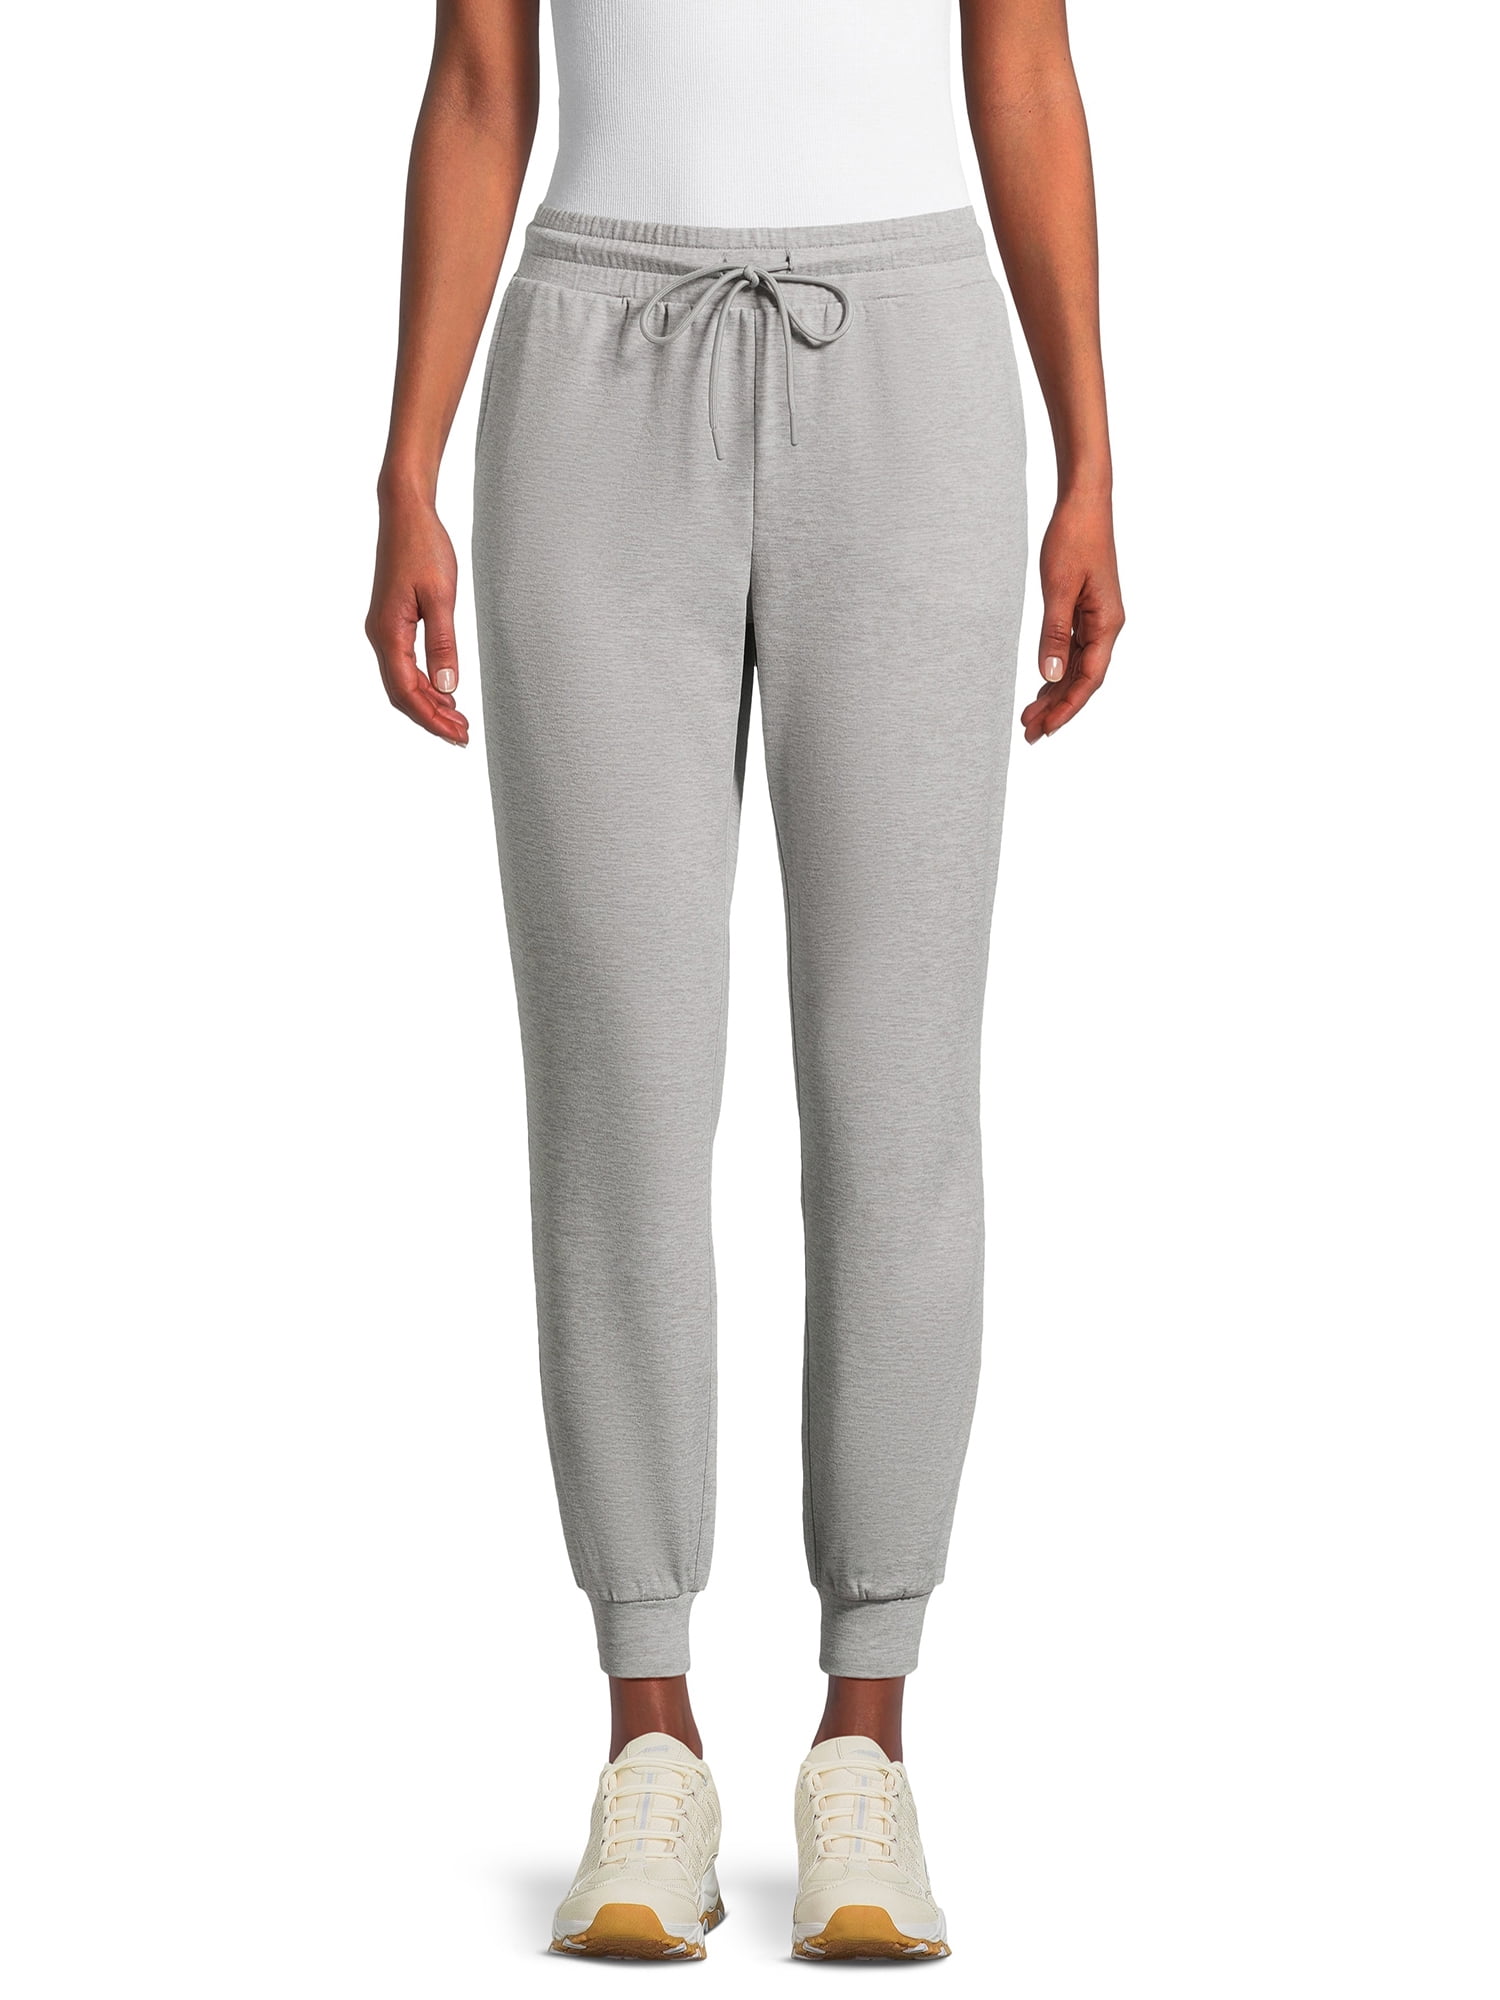 Athletic Works Women's and Women's Plus Buttery Soft Lightweight Joggers,  Sizes XS-4X